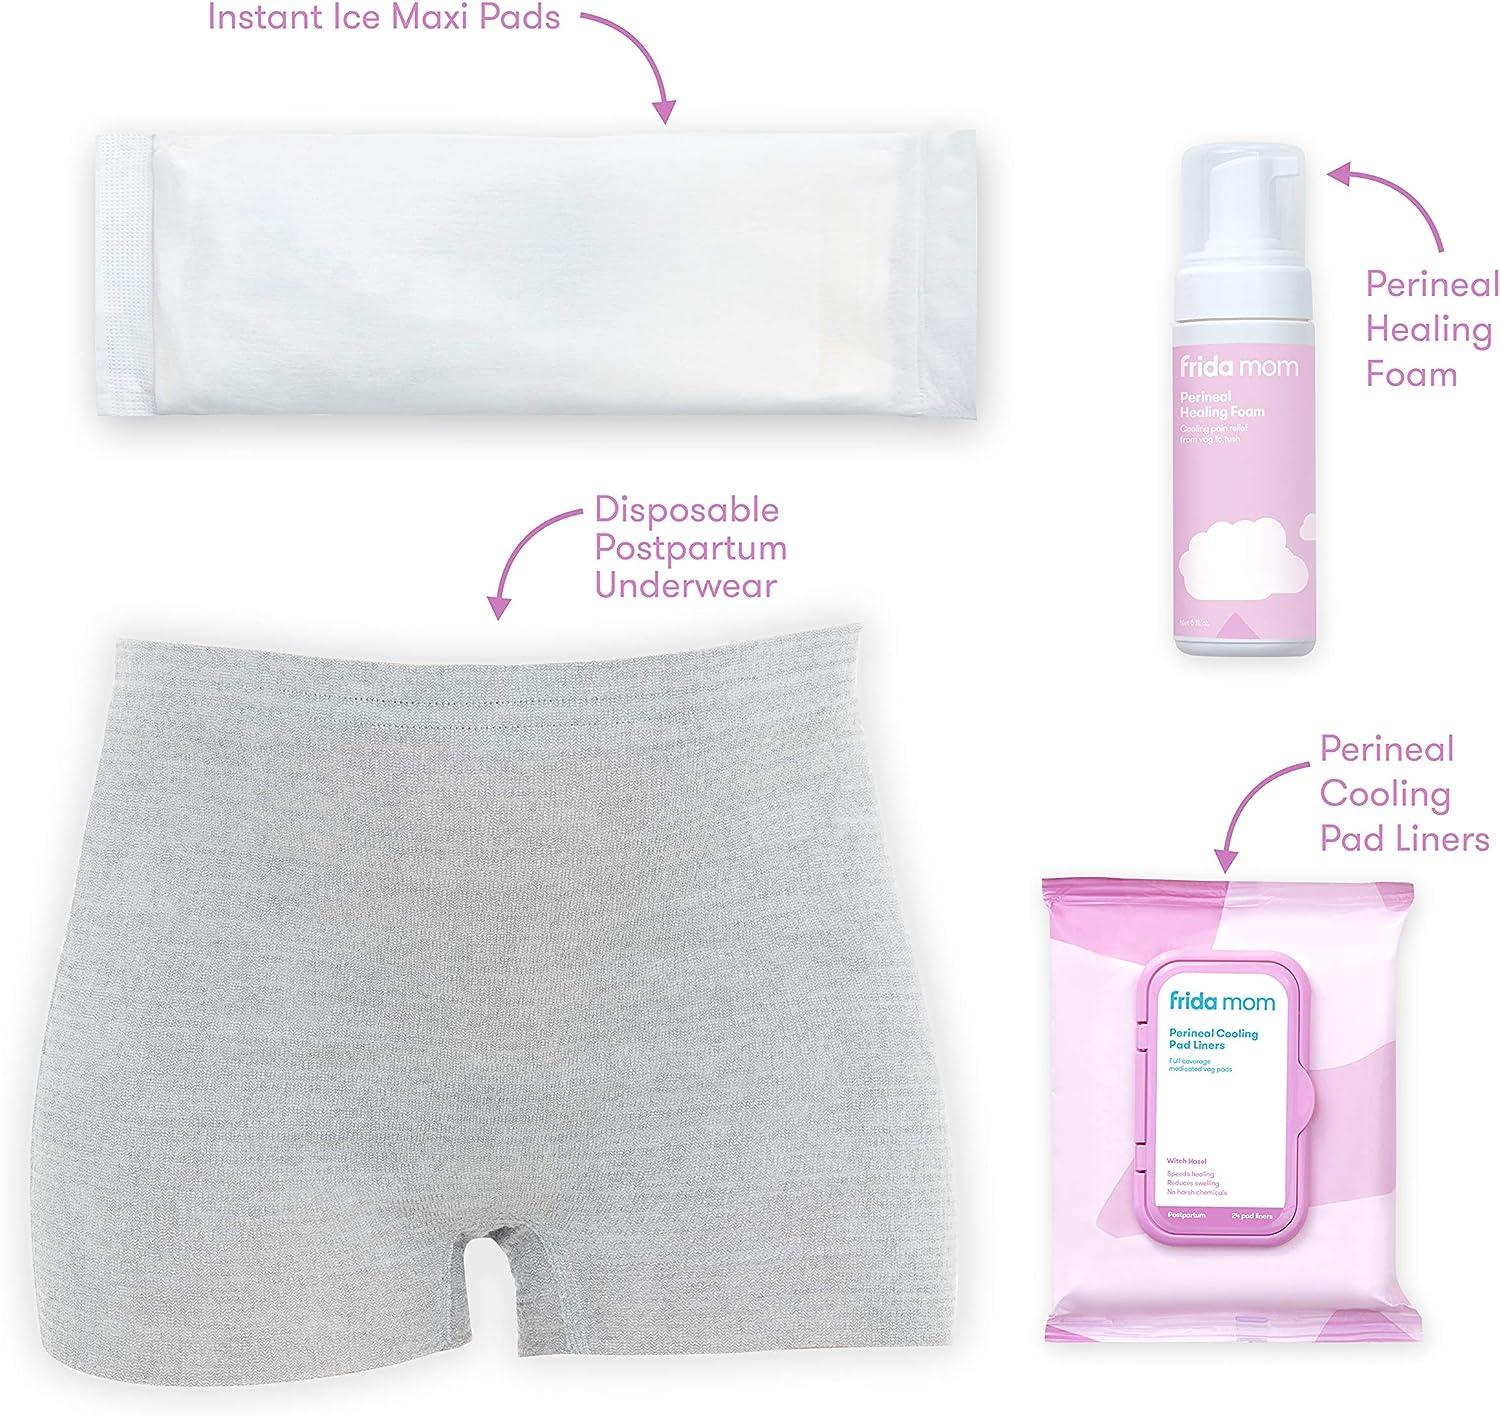 Frida Mom Postpartum Recovery Essentials Kit Includes Disposable Underwear,  Ice Maxi Absorbency Pads, Cooling Witch Hazel Medicated Pad Liners,  Perineal Medicated Healing Foam